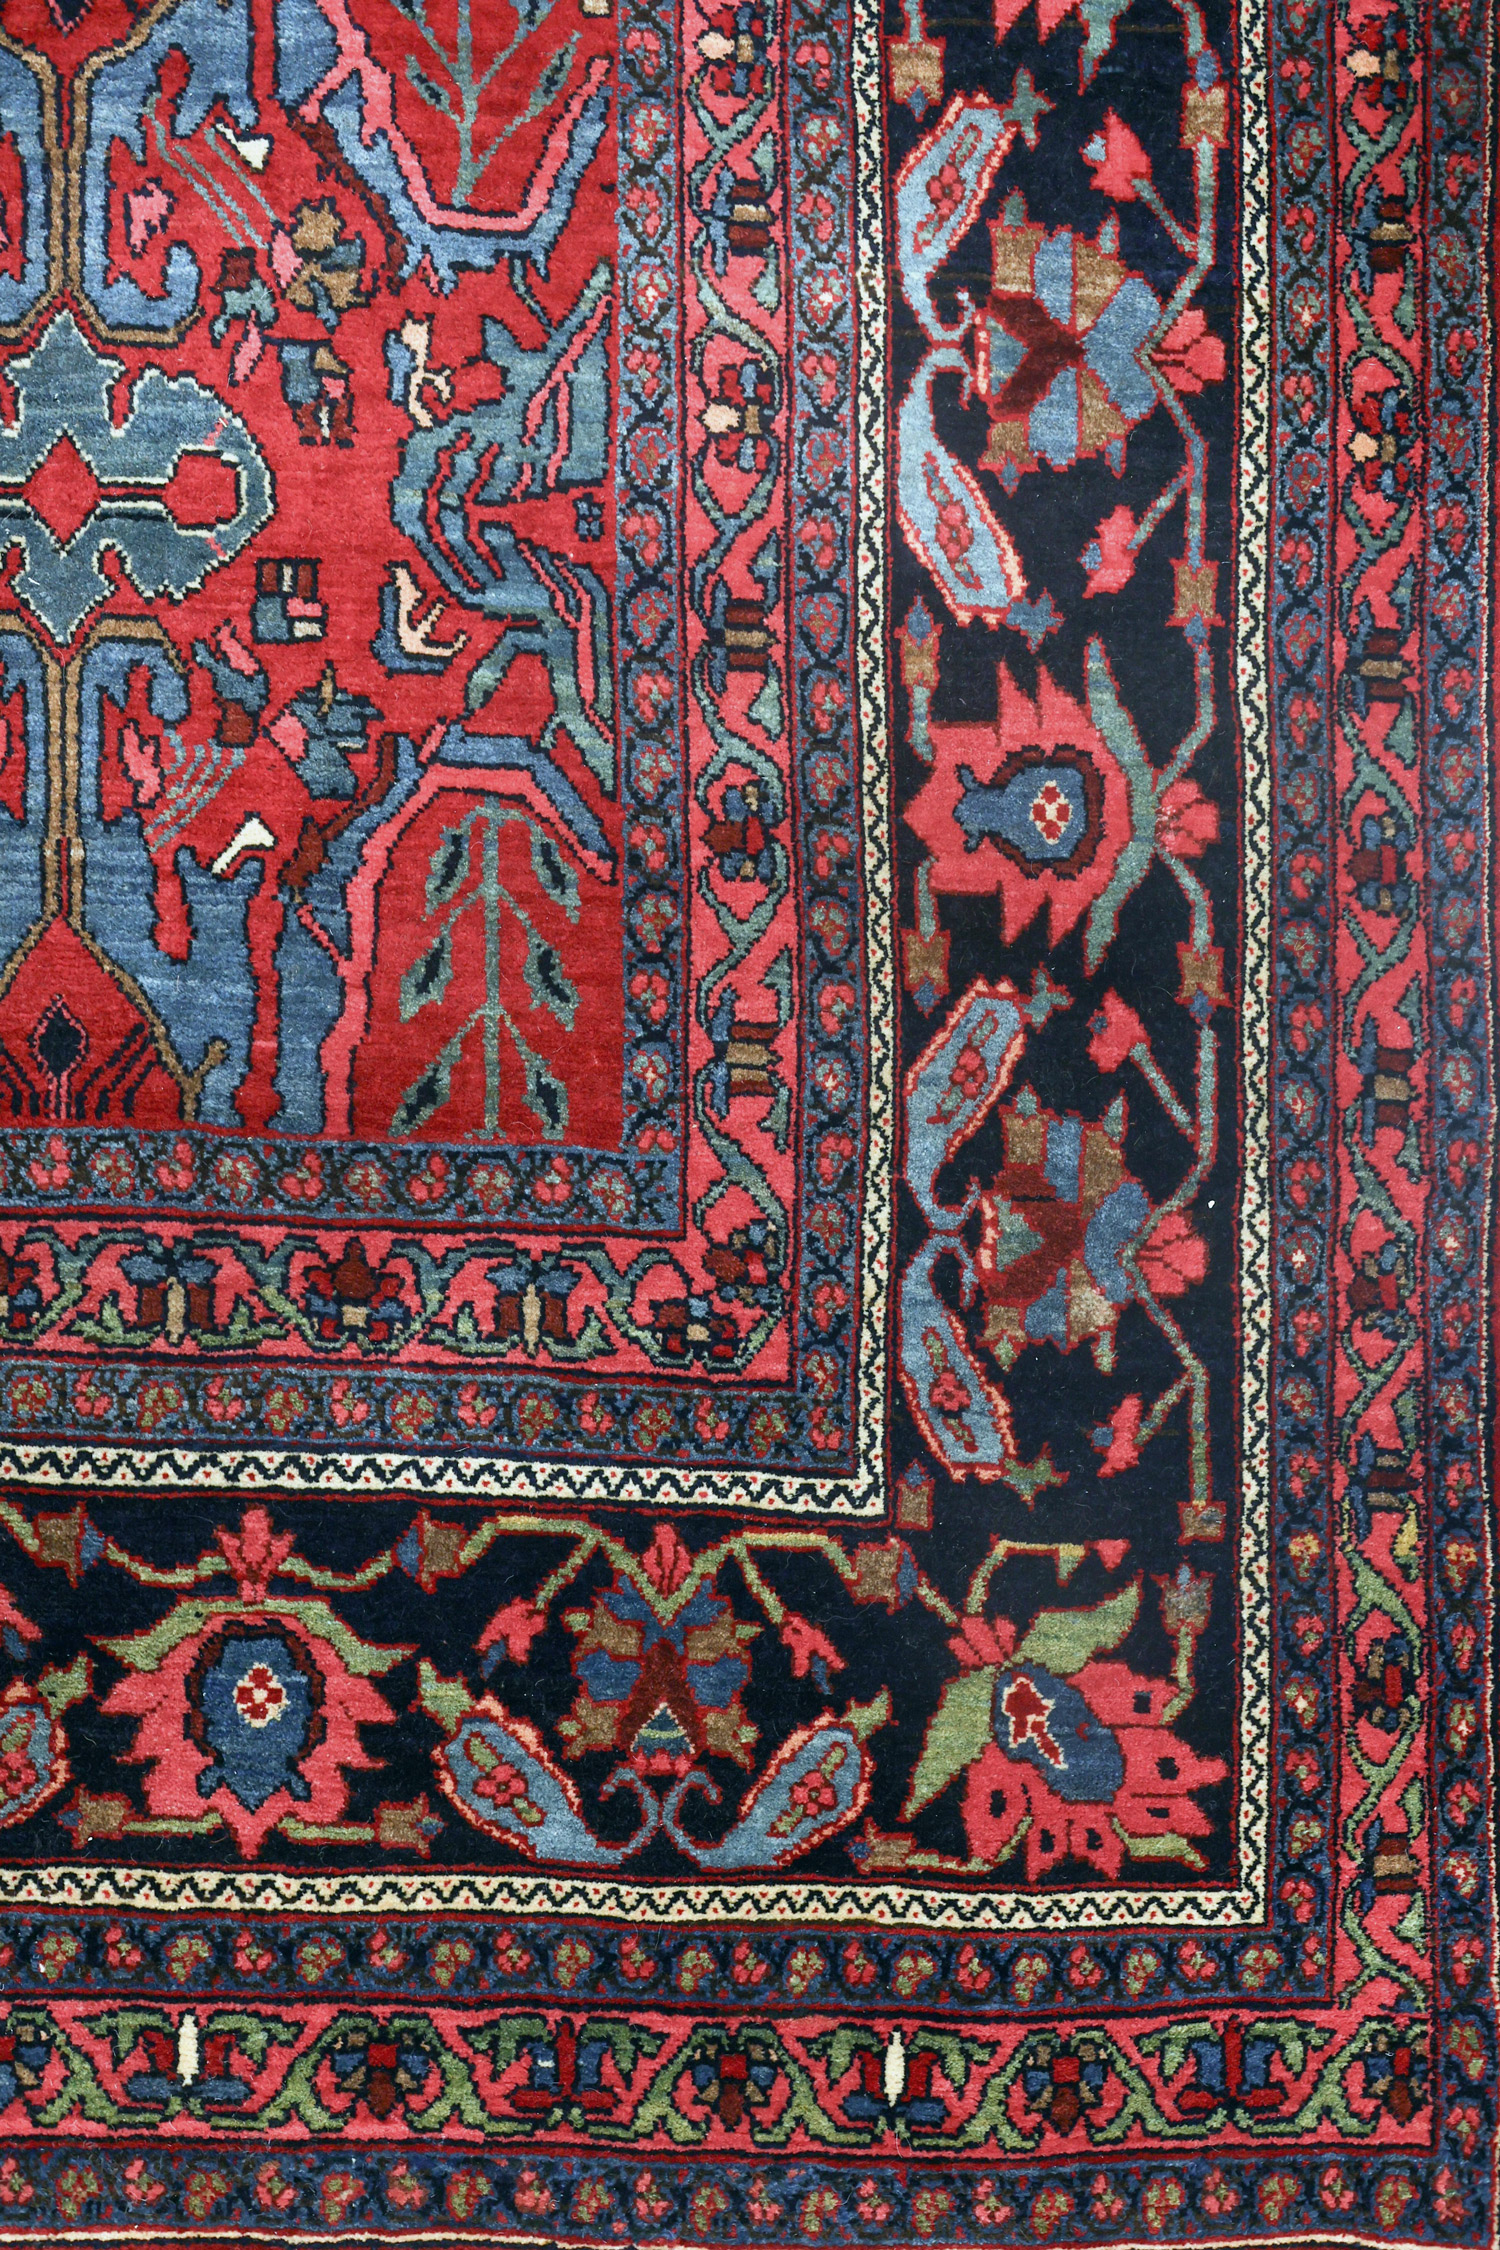 Detail of the navy blue border from an antique Persian Bidjar carpet that features a red field that is decorated with the famous Calyx design, northwest Persia, circa 1910 - Douglas Stock Gallery is one of America's leading dealers in antique Persian Bidjar, Senneh and Kurdish nomadic run from northwest Persia's Kurdistan province.